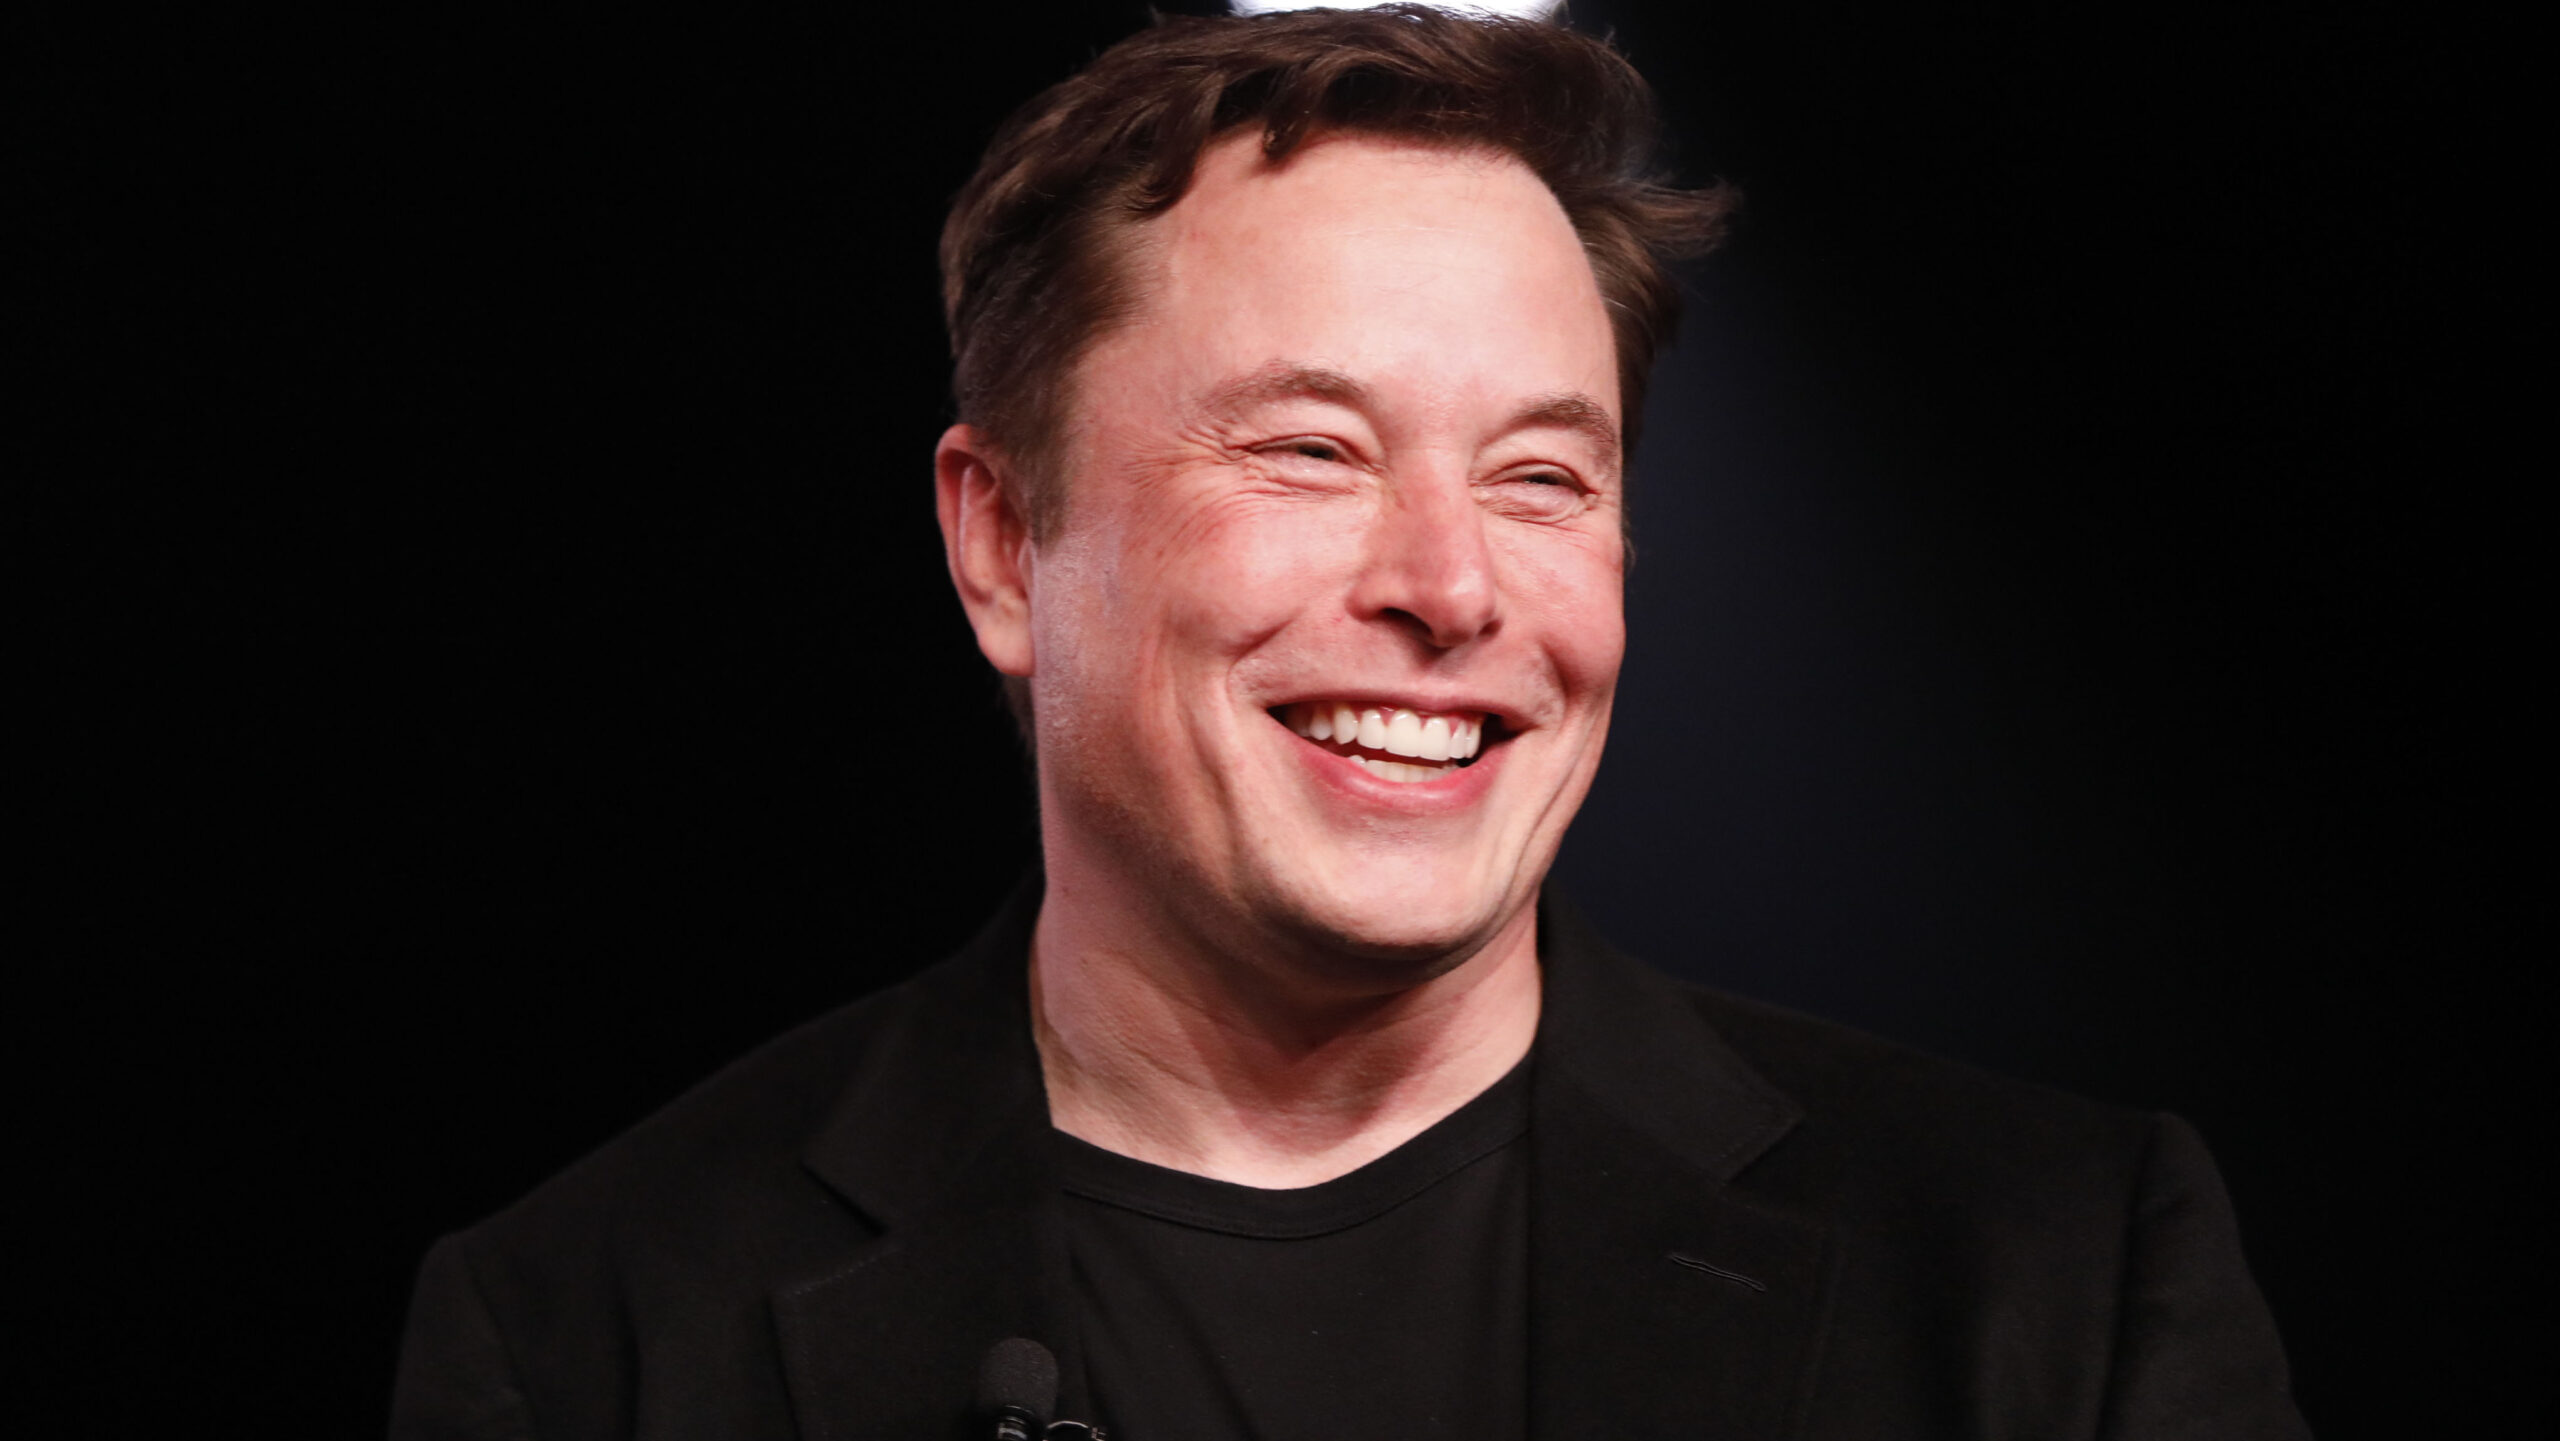 Elon Musk Mocks Twitter Employee Openly On The Platform With Movie Clip From ‘Office Space’